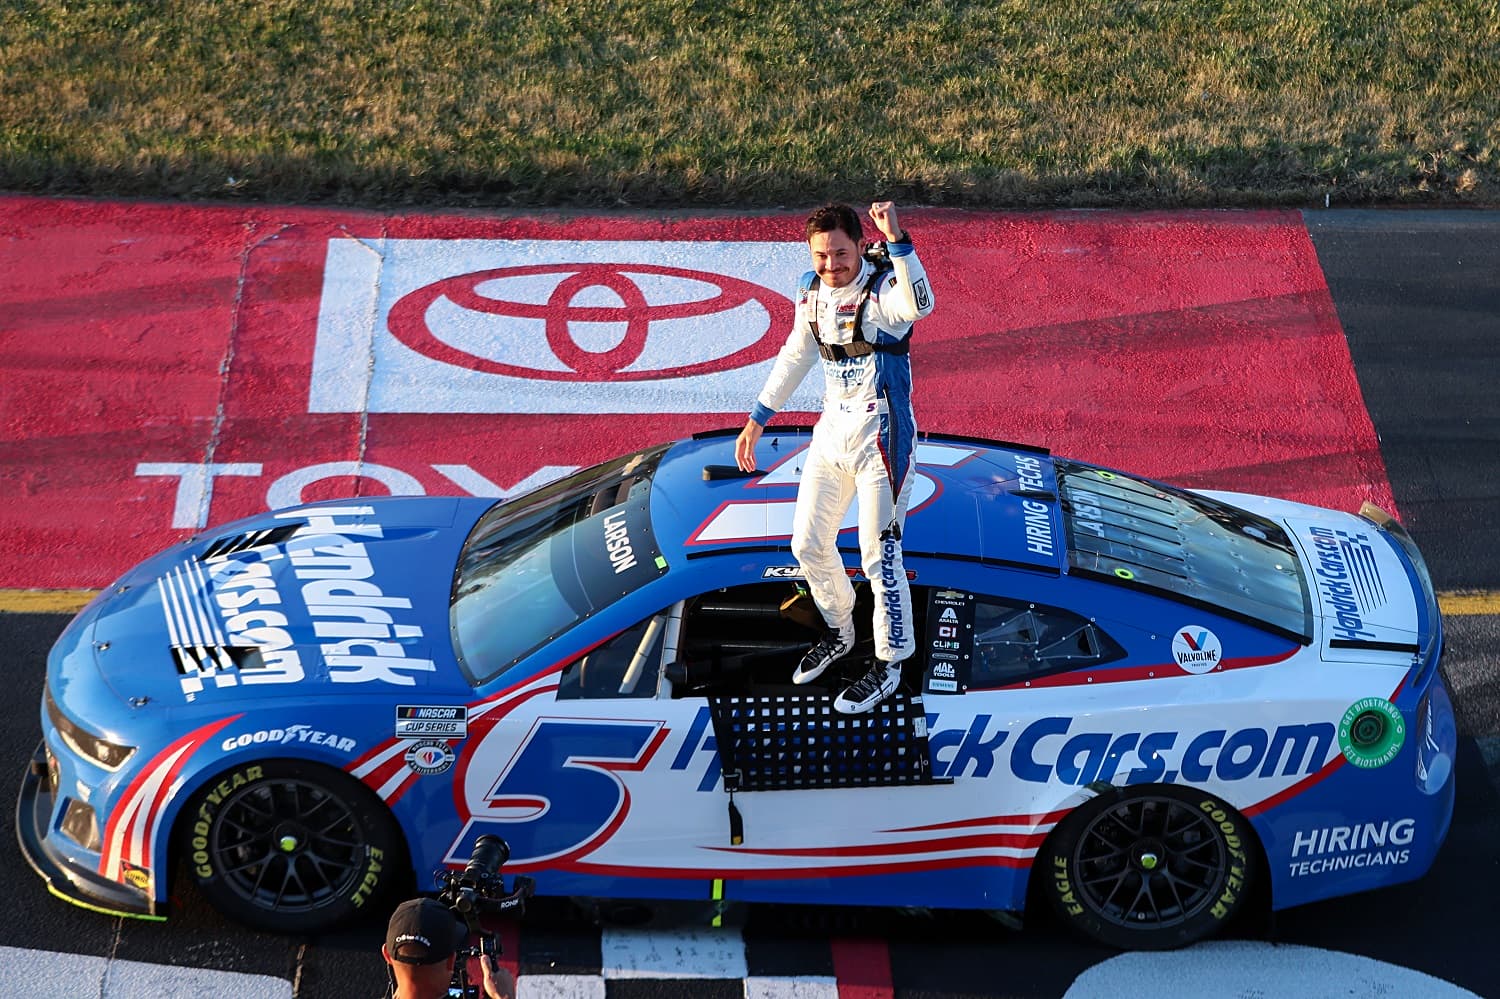 Kyle Larson, driver of the No. 5 HendrickCars.com Chevrolet, celebrates after winning the NASCAR Cup Series Toyota Owners 400 at Richmond Raceway on April 2, 2023.